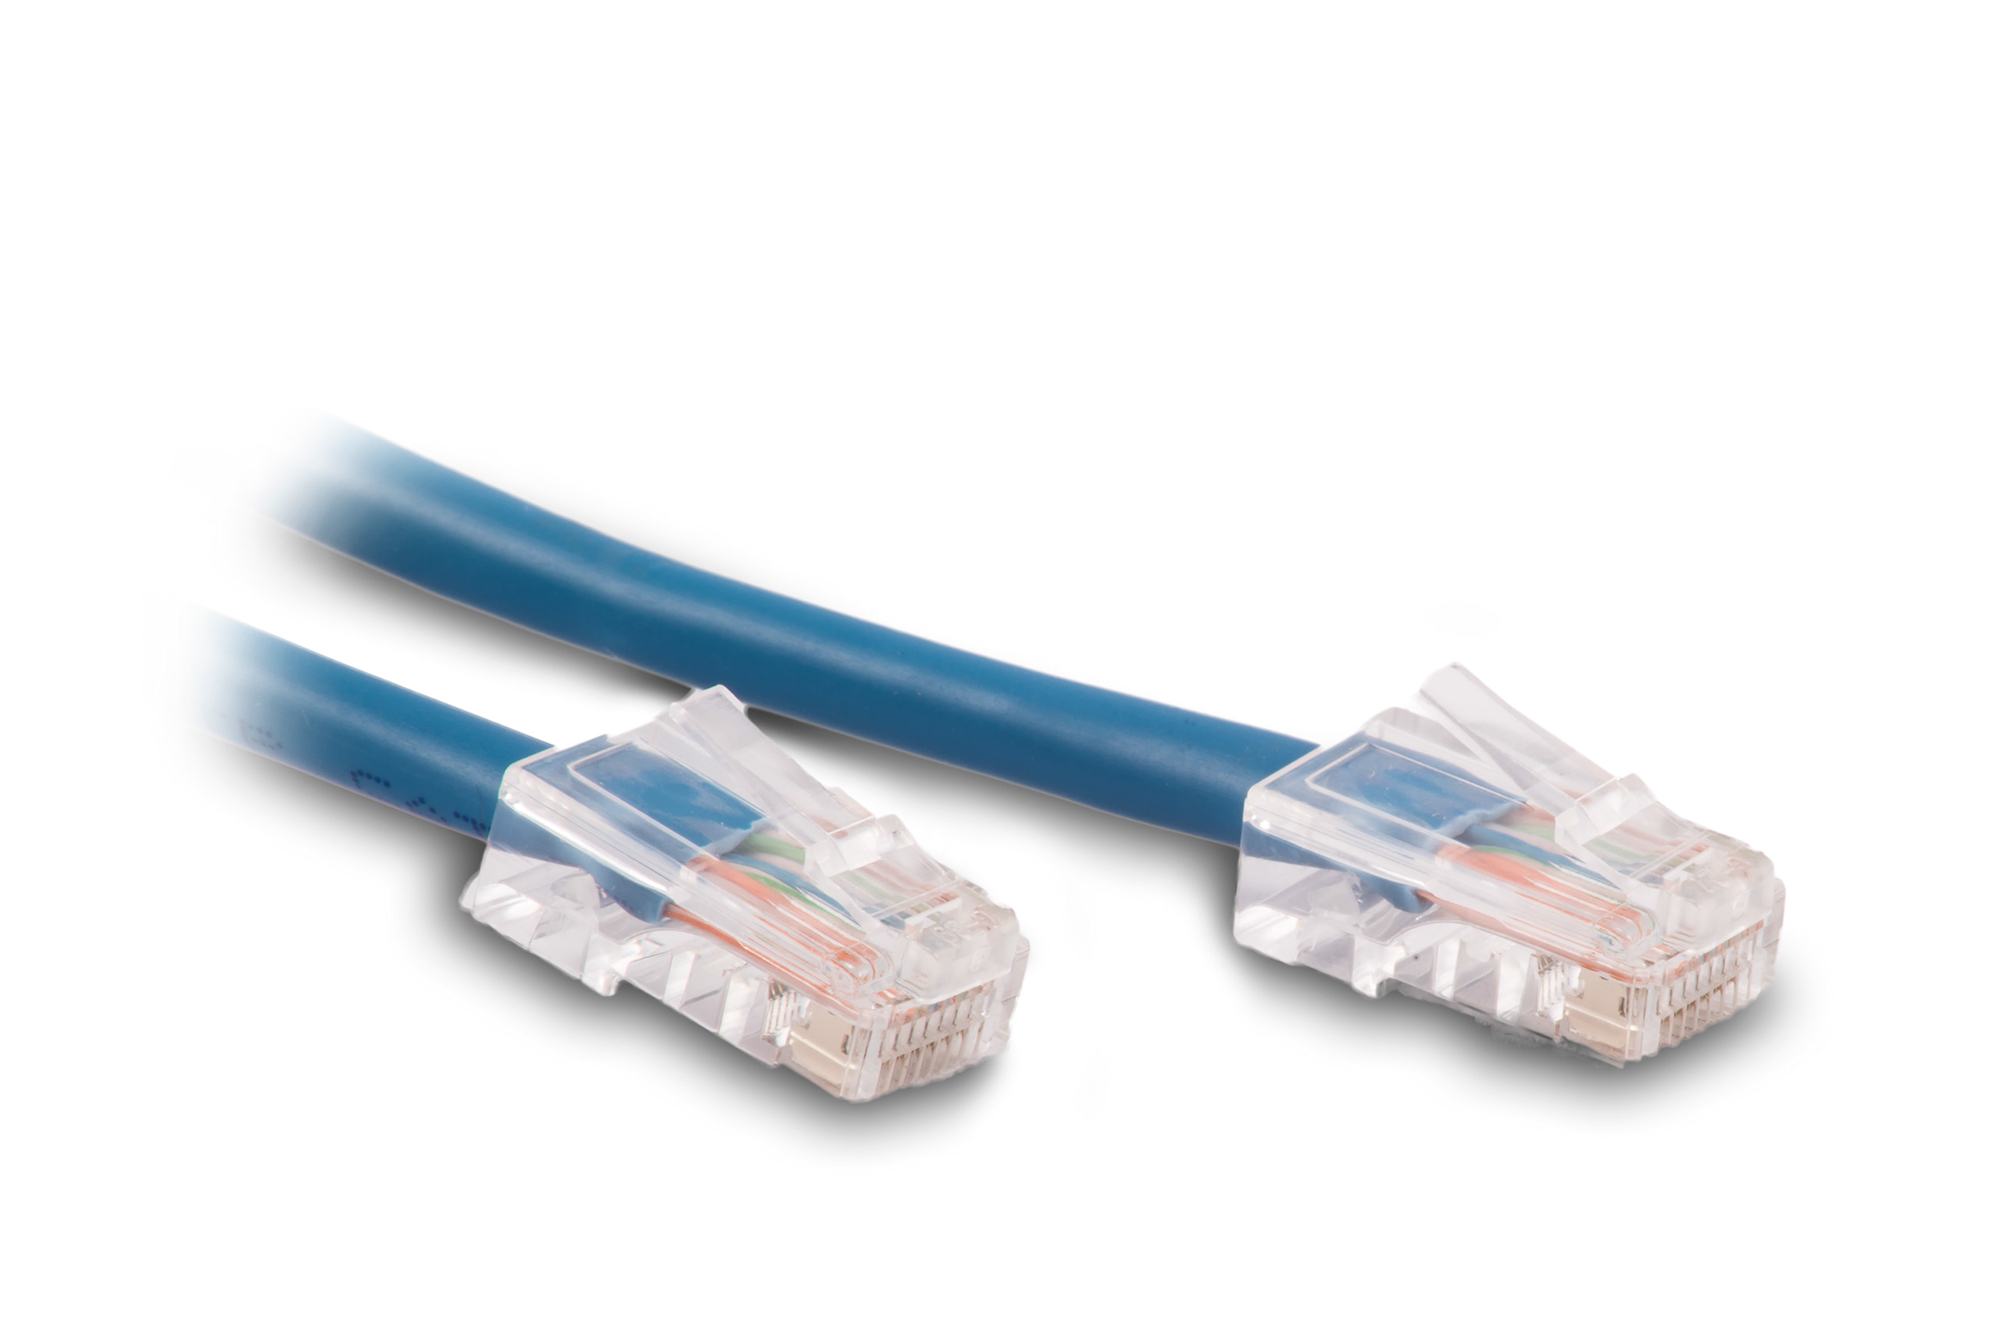 25 Feet Category 5e Network Patch Cable-Blue-Plenum Rated for in-ceiling installations!